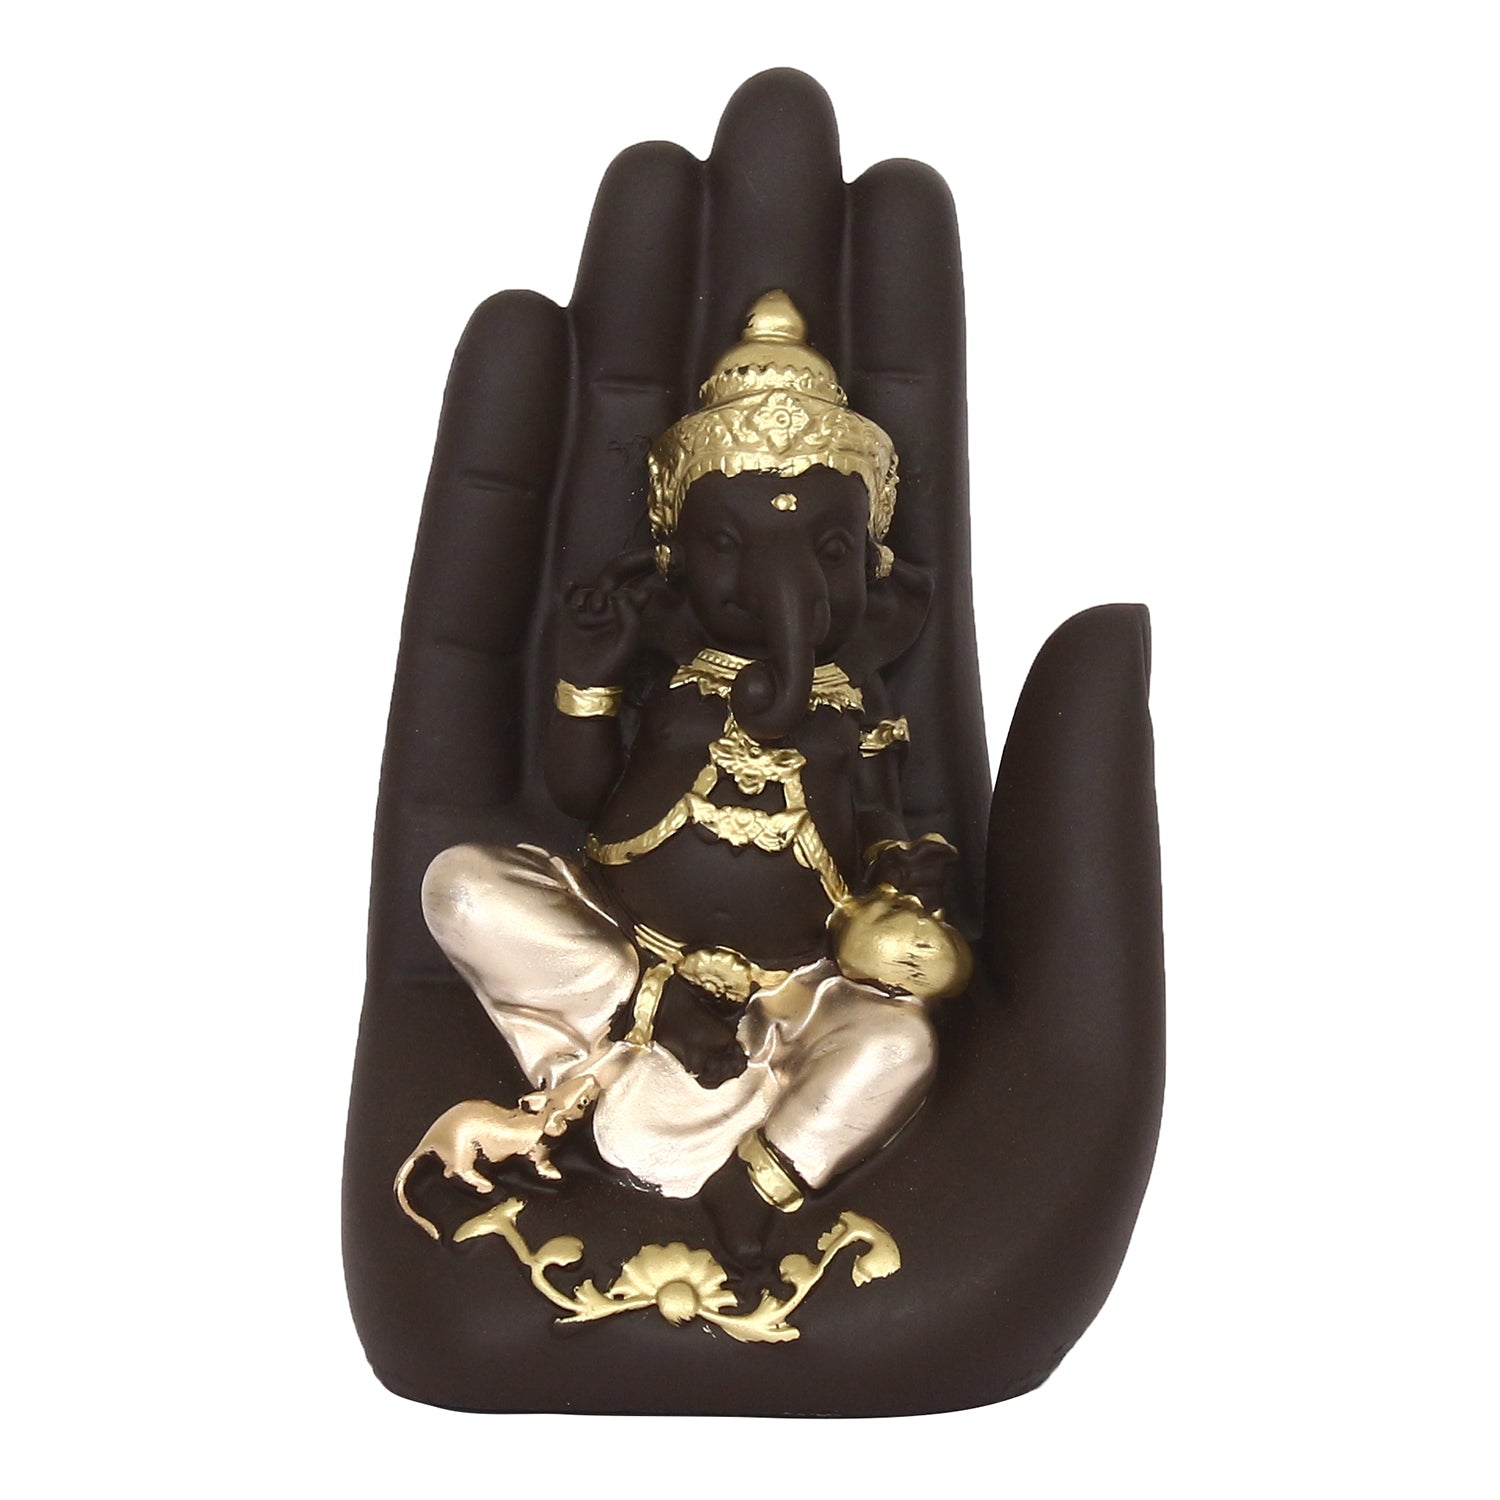 Black and Golden Handcrafted Polyresin Palm Ganesha Idol 2